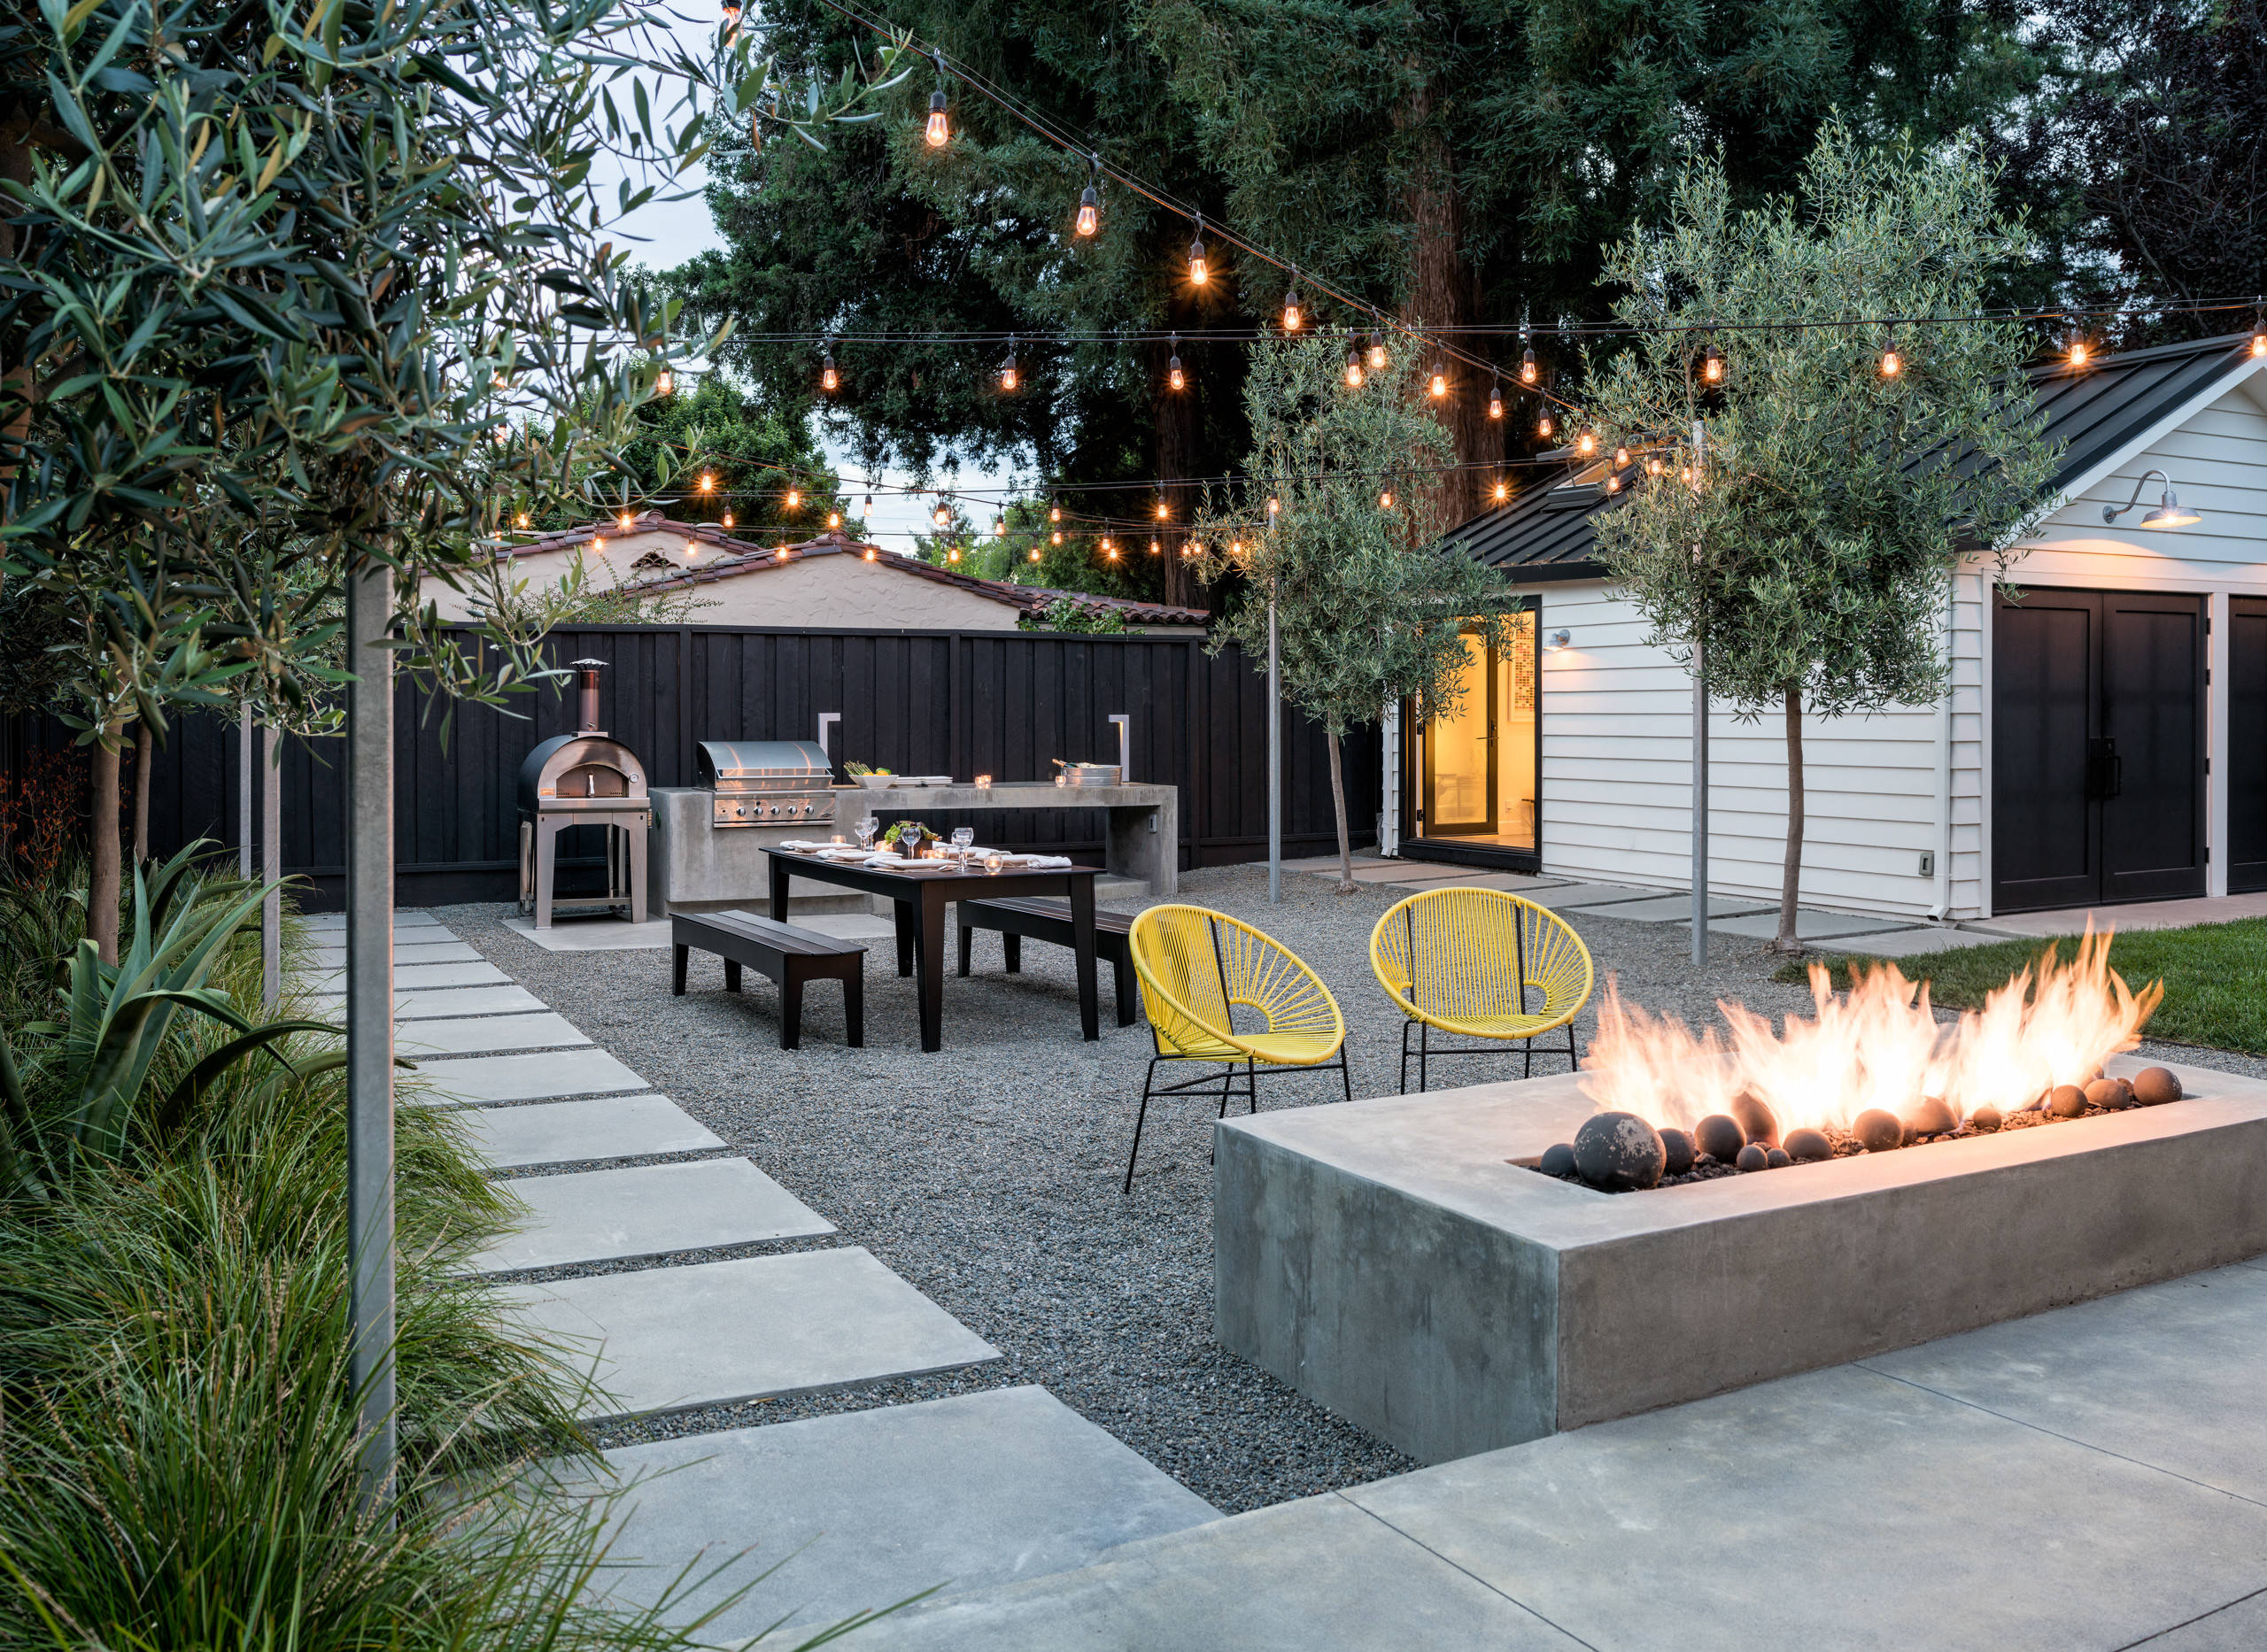 75 Beautiful Backyard Design With A Fire Pit Pictures Ideas December 2020 Houzz